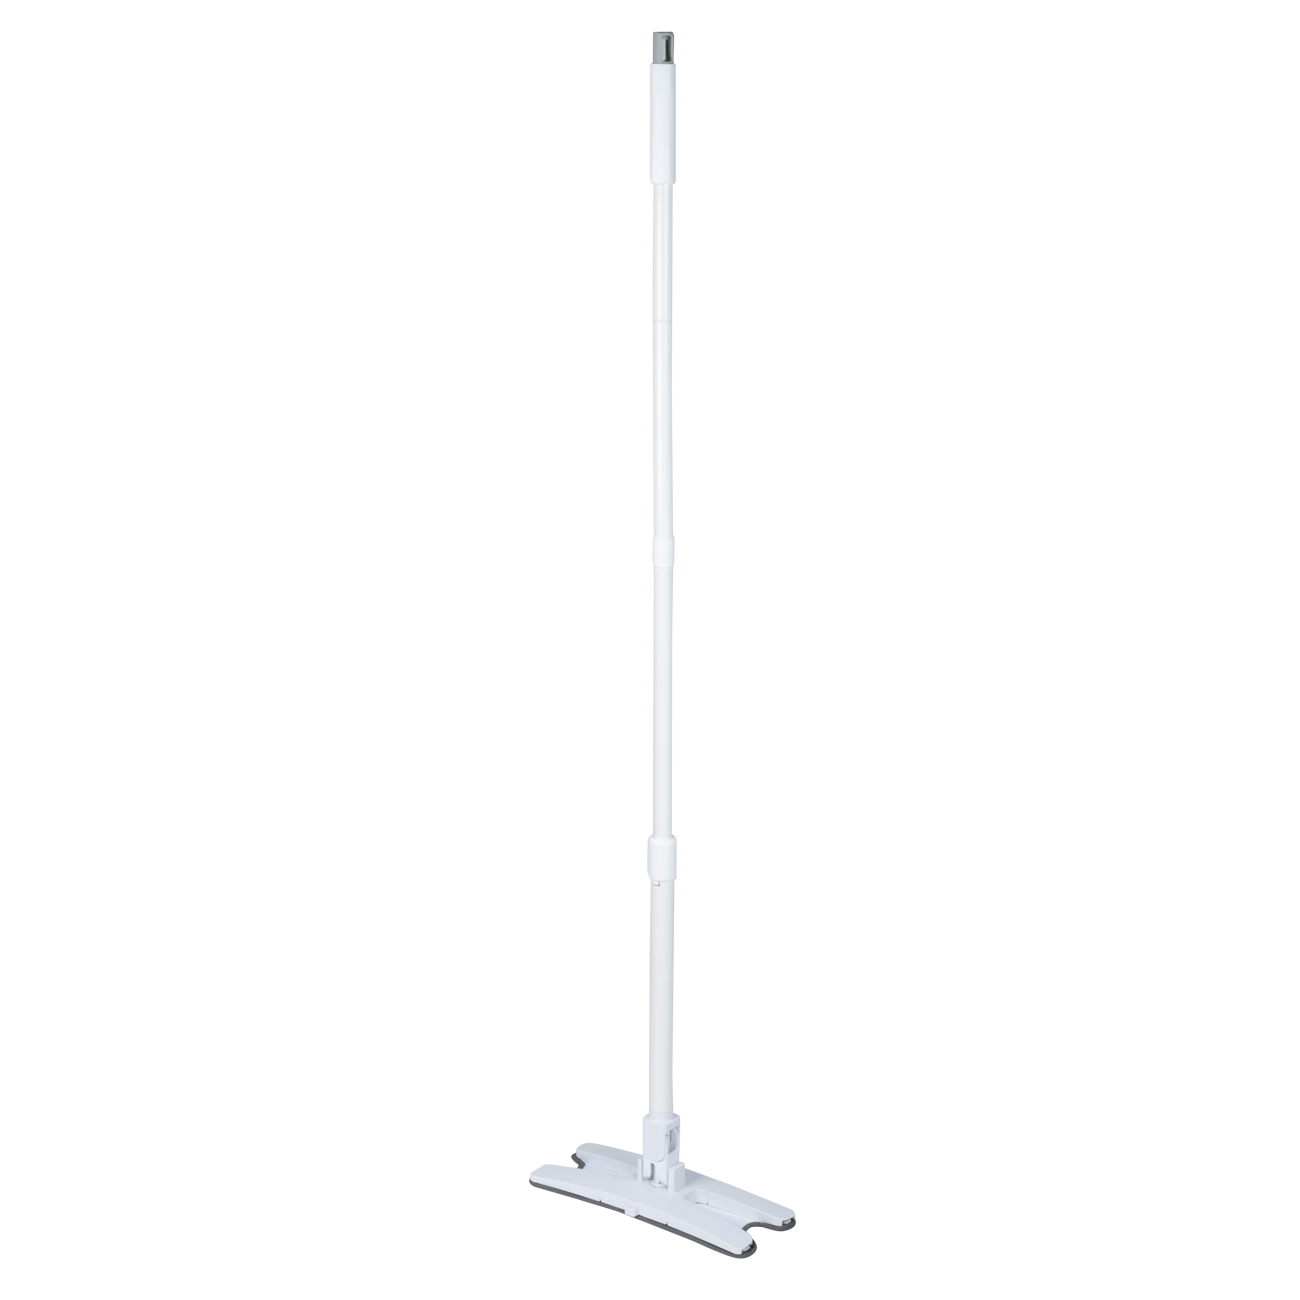 Mop with bucket, wringing and rinsing, curly, white-gray, Mop изображение № 3